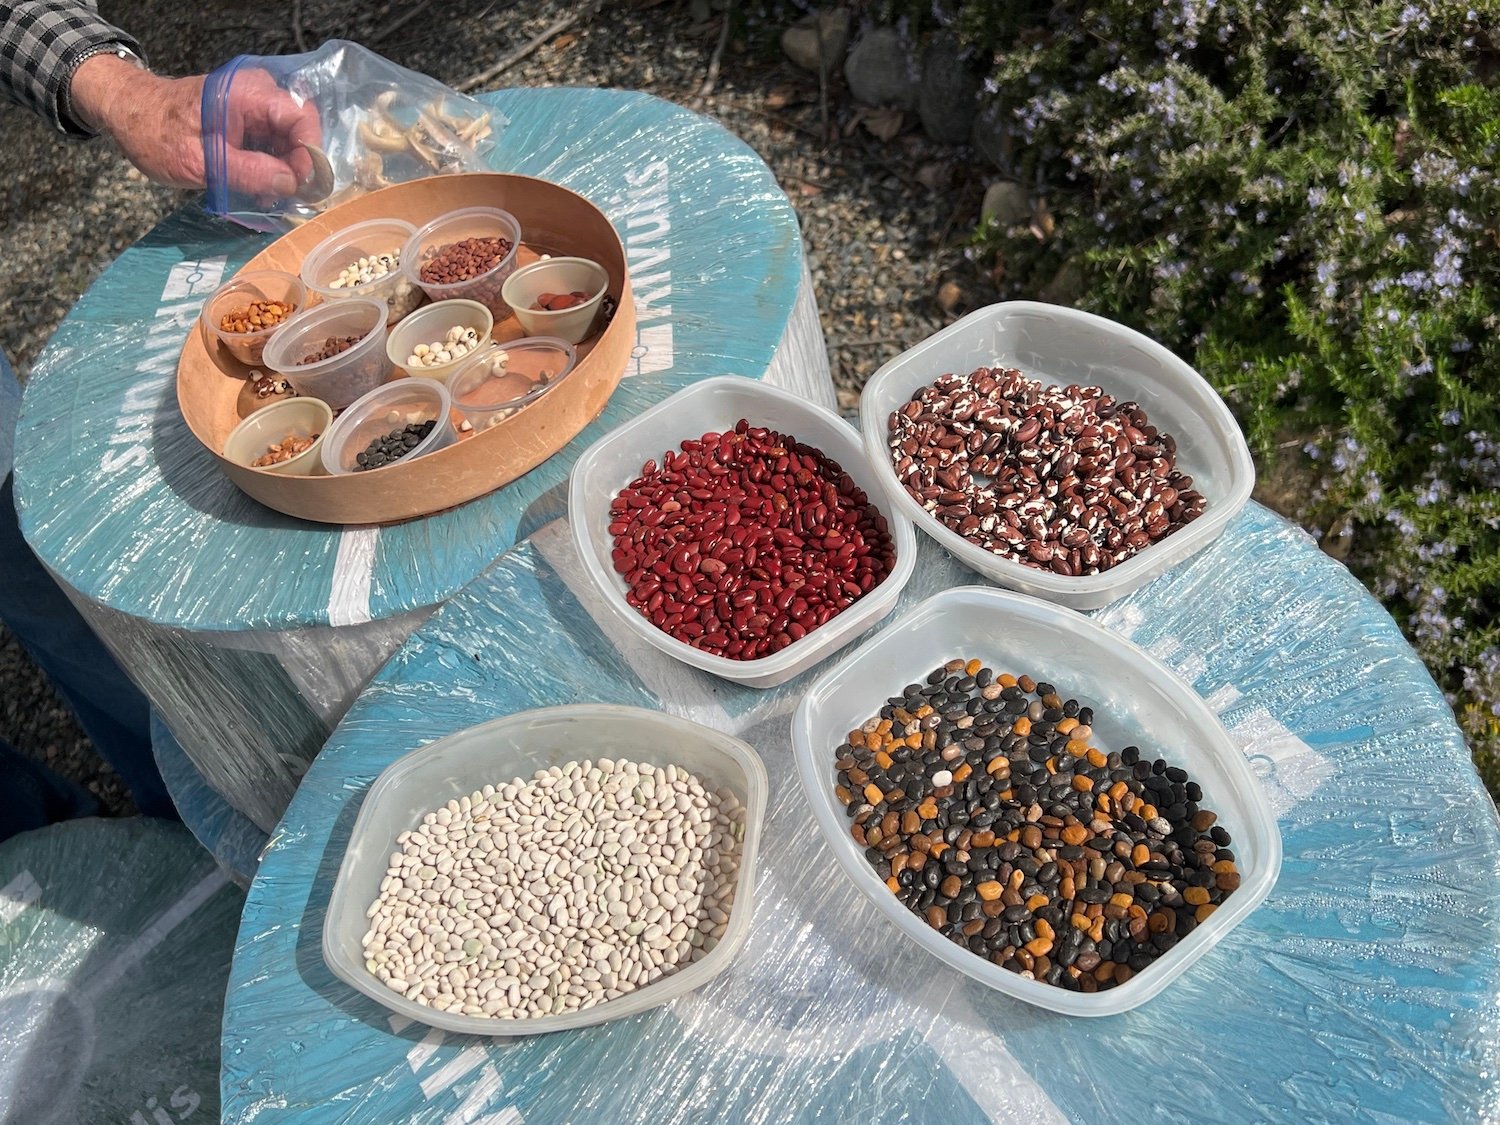 Rio Del Rey Heirloom Farms featuring heirloom beans like Southwest Gold, Tiger Eye, and Tepary being sorted